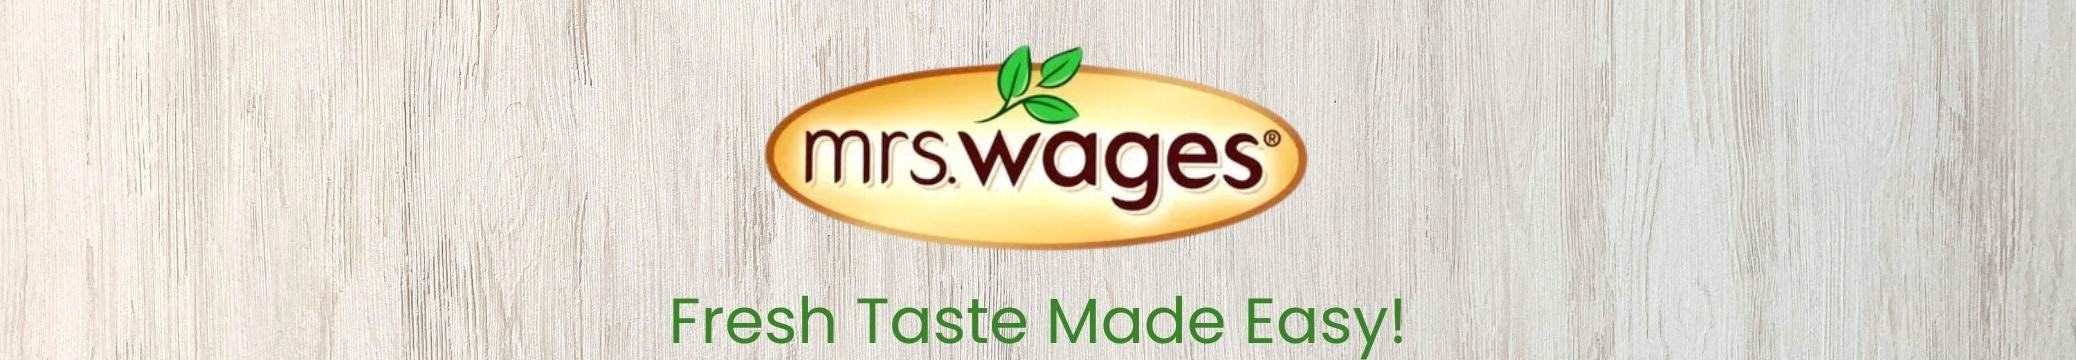 Mrs. Wages Canning Products